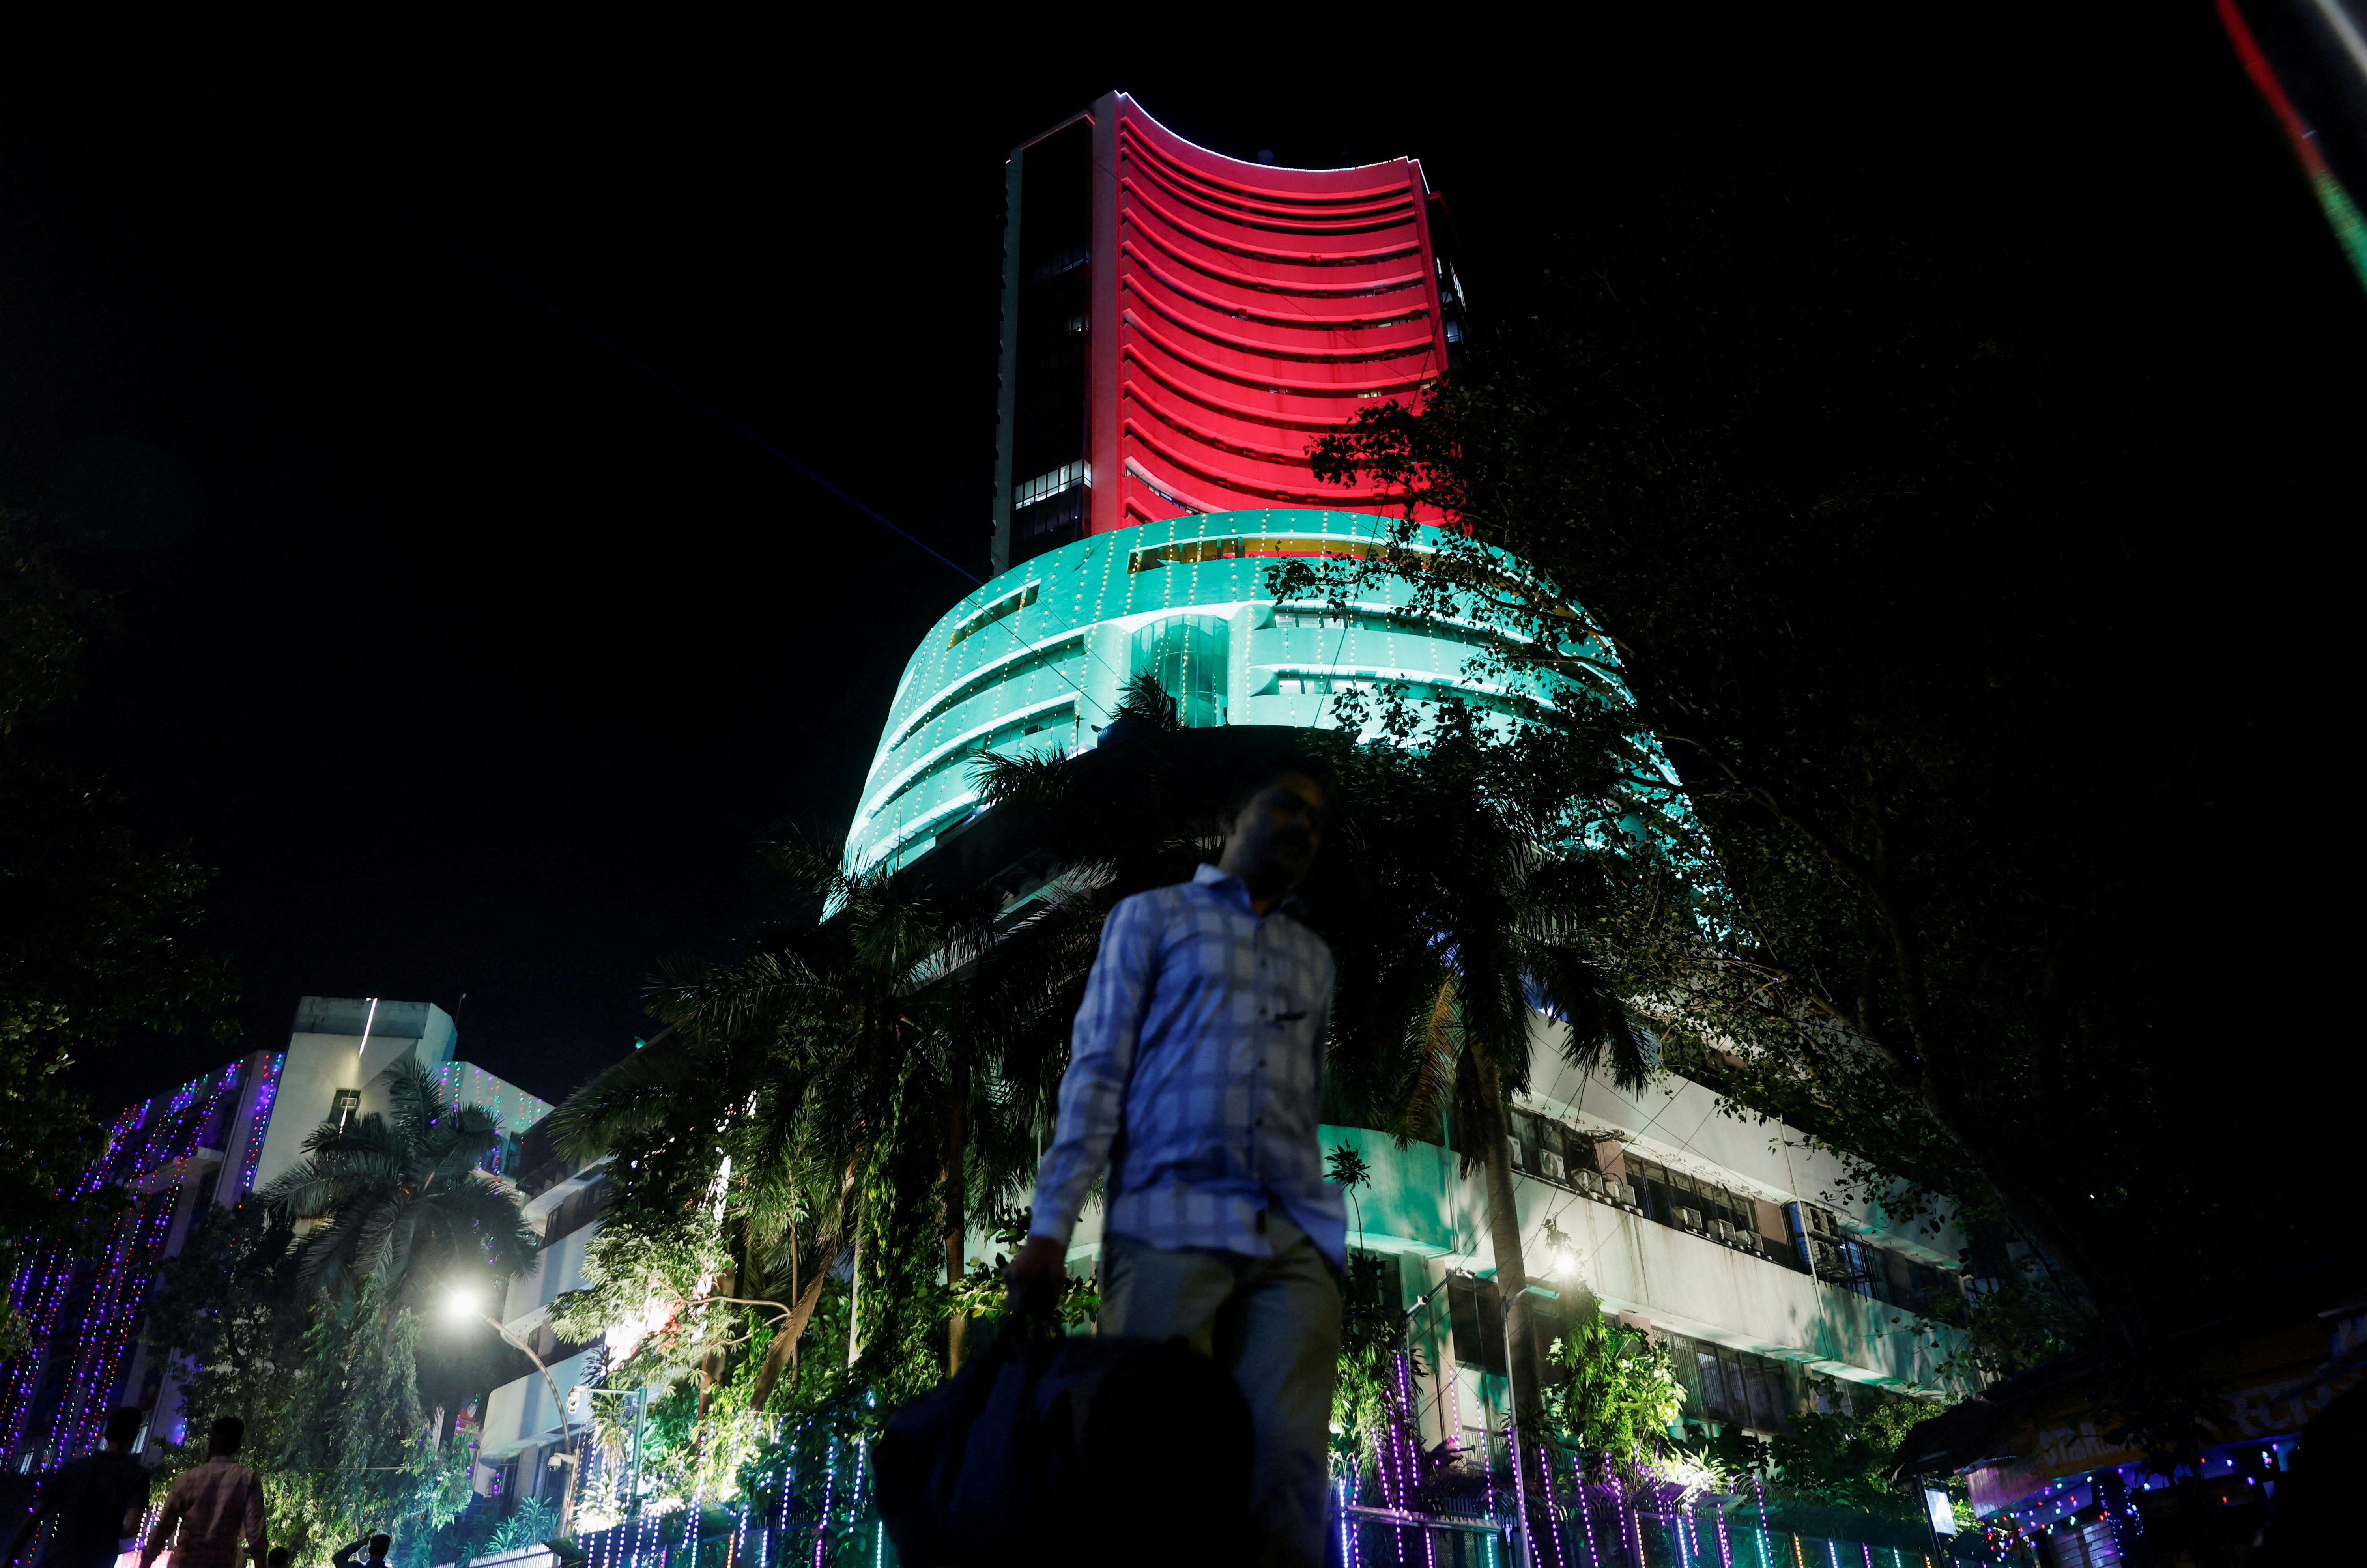 The Bombay Stock Exchange (BSE) building is seen lit up for Diwali, the Hindu festival of lights, in Mumbai